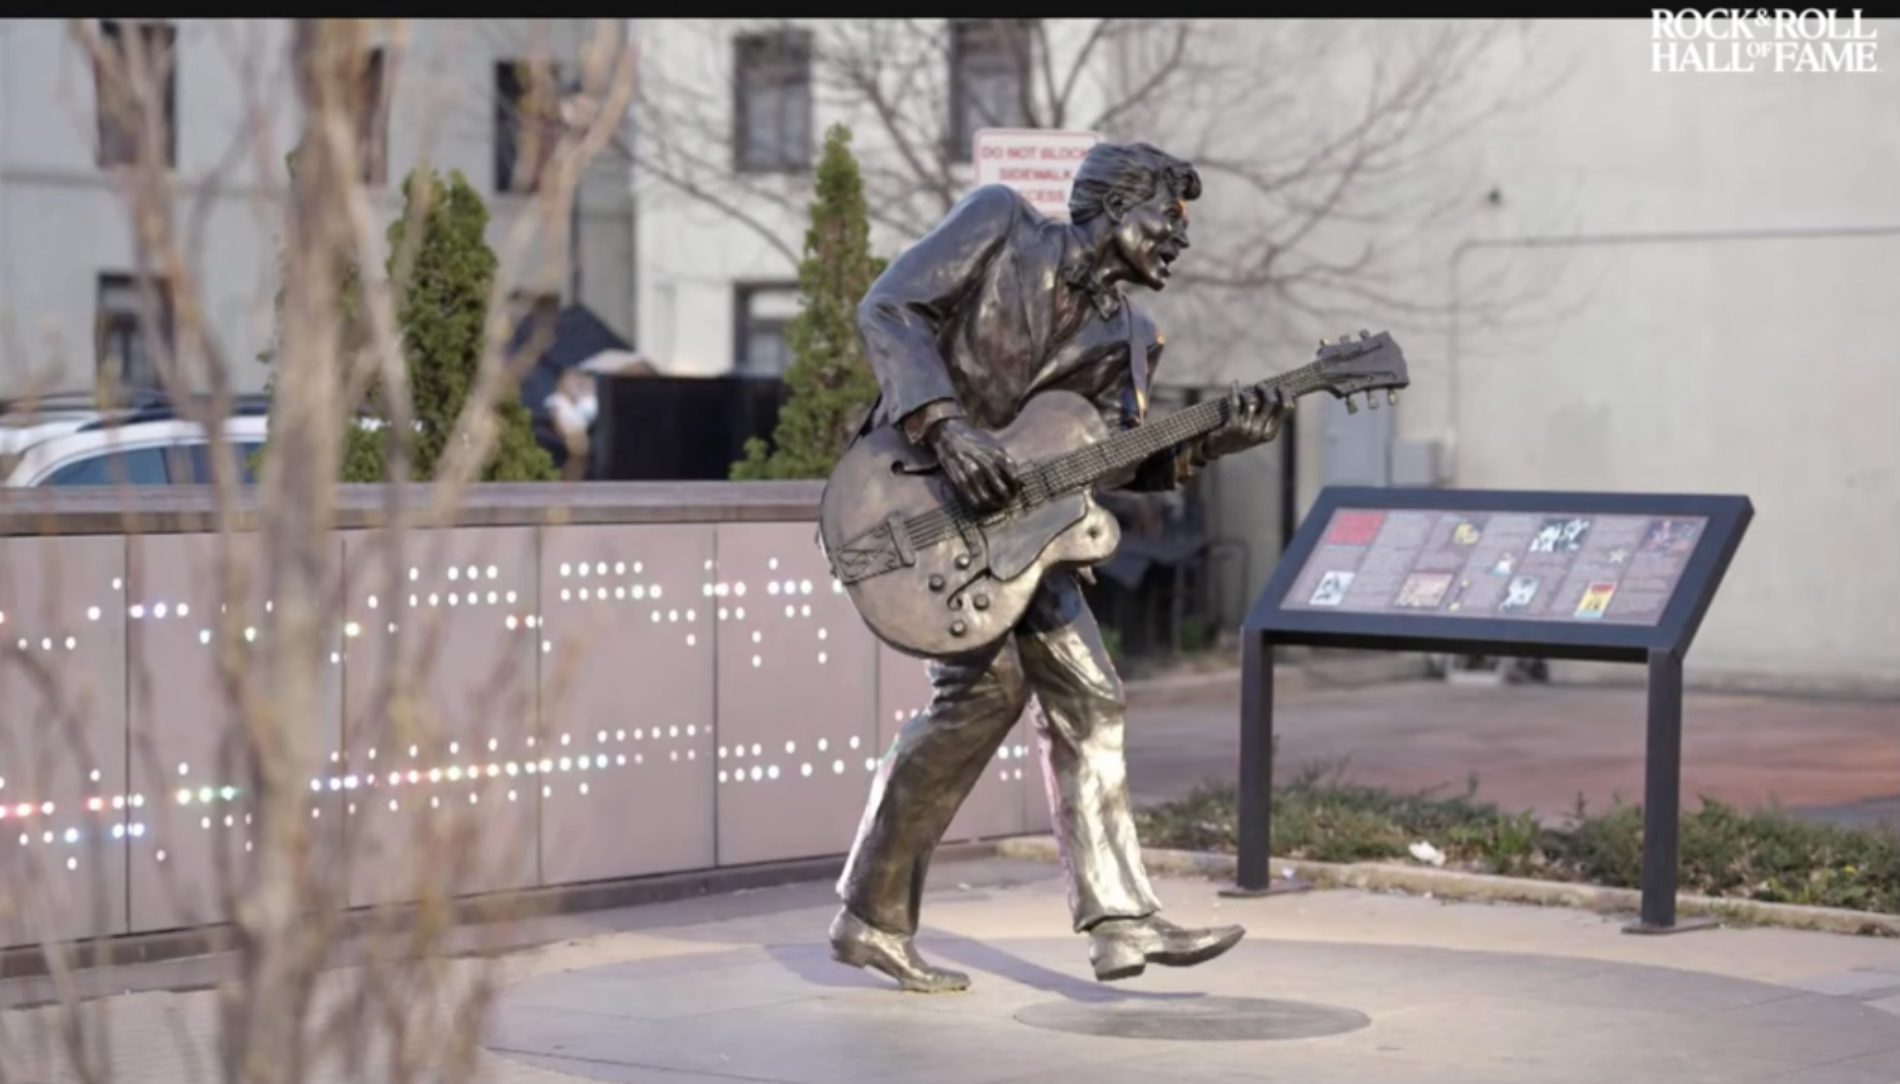 Chuck Berry in St. Louis | An Interview with Charles Berry, Jr., Joe Edwards & Jimmy Marsala